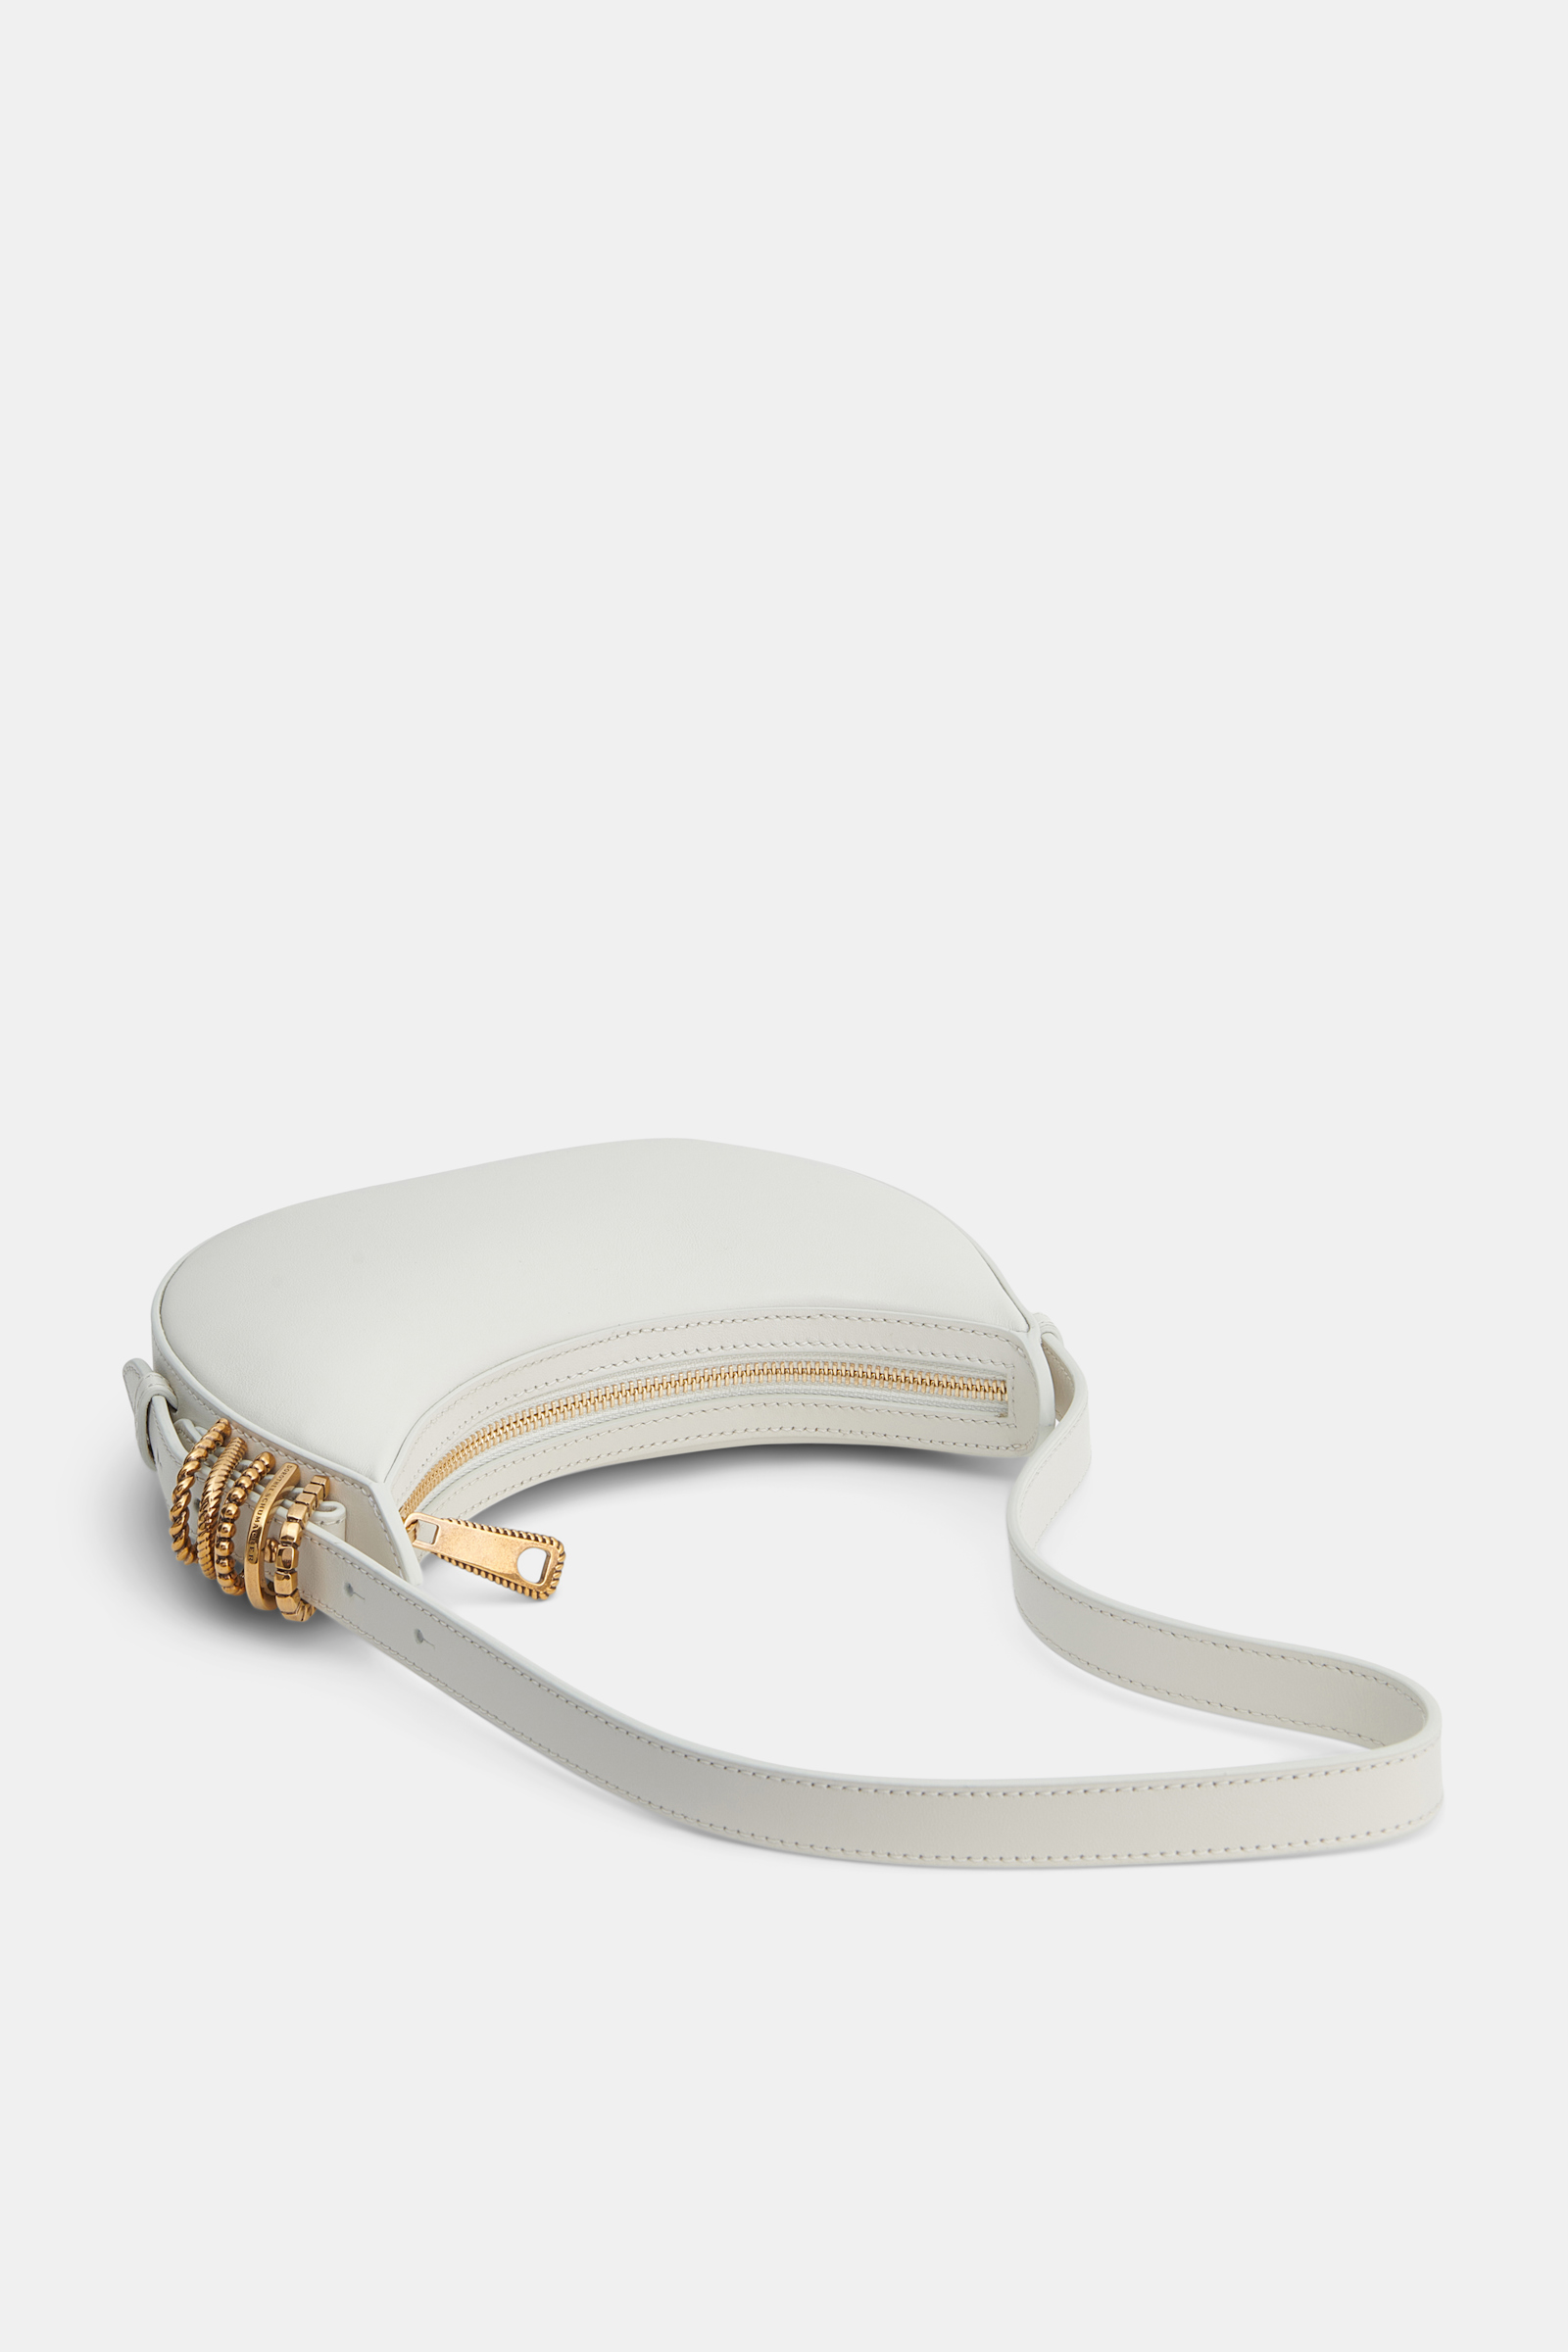 Dorothee Schumacher Half Moon Mini Bag in soft calf leather with D-ring hardware off white